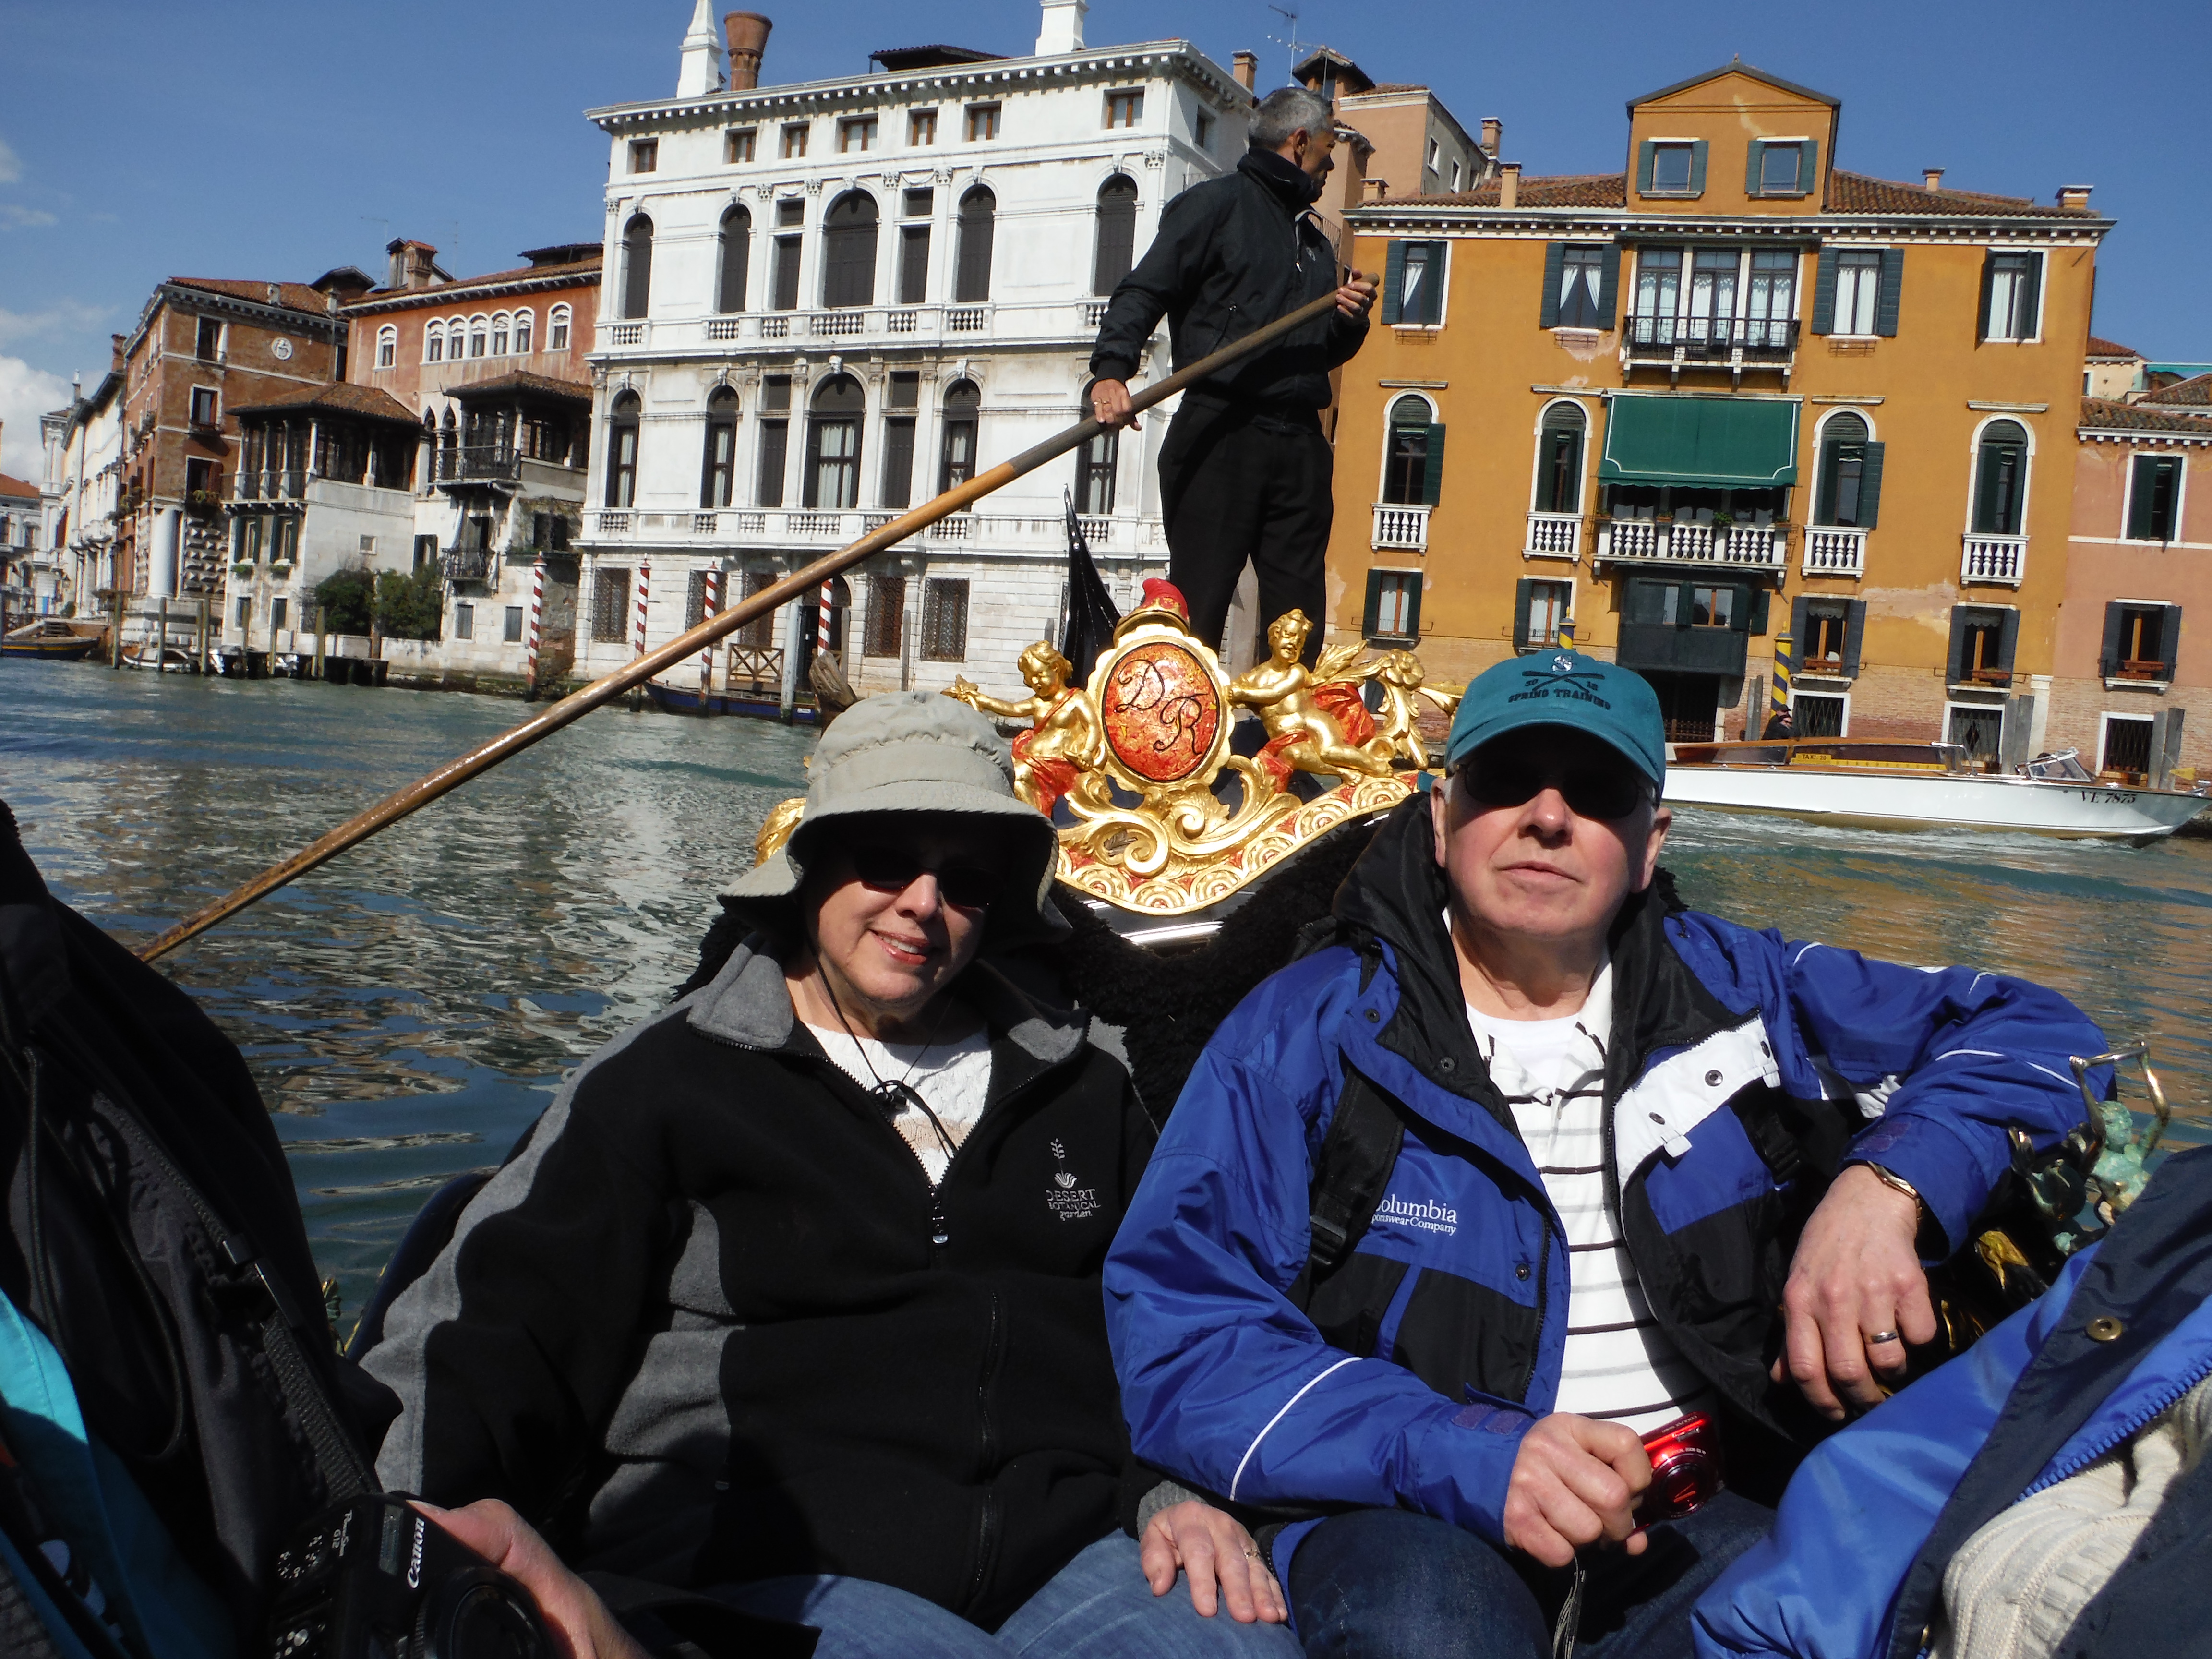 My parents in Venice